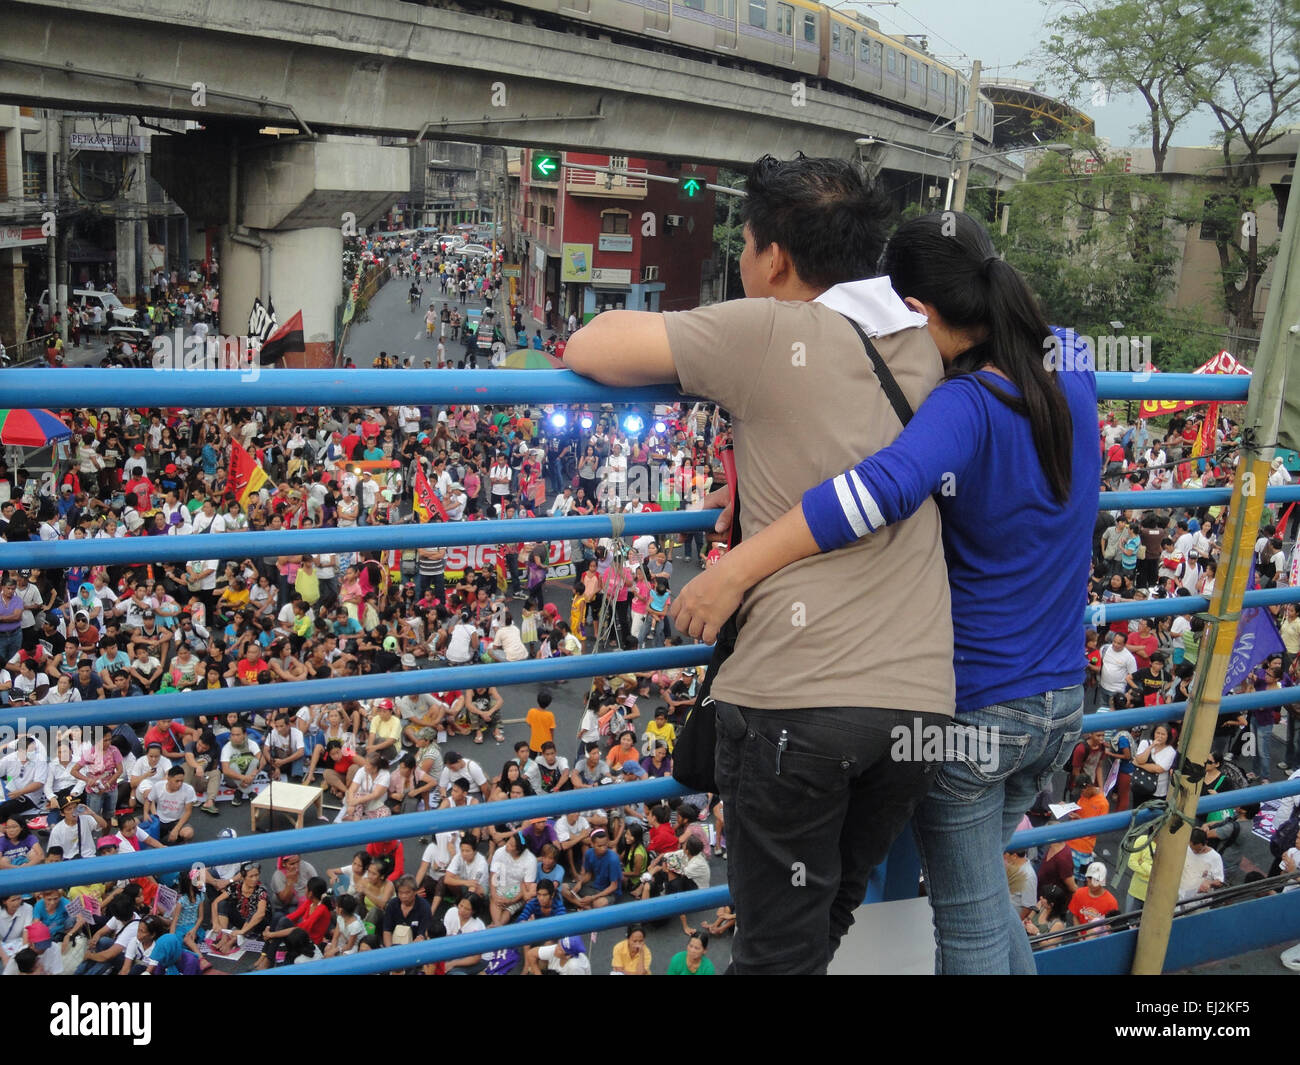 Manila, Philippines. 20th Mar, 2015. A Filipino couple looks on during a rally at Mendiola. President Aquino is facing calls for his removal over the botched anti-terror operation last January 25 in Mamasapano, Maguindanao to hunt wanted Malaysian bombmaker Zulkifri bin Hir, alias Marwan, that resulted in the deaths of 44 police commandos. Credit:  Richard James Mendoza/Pacific Press/Alamy Live News Stock Photo